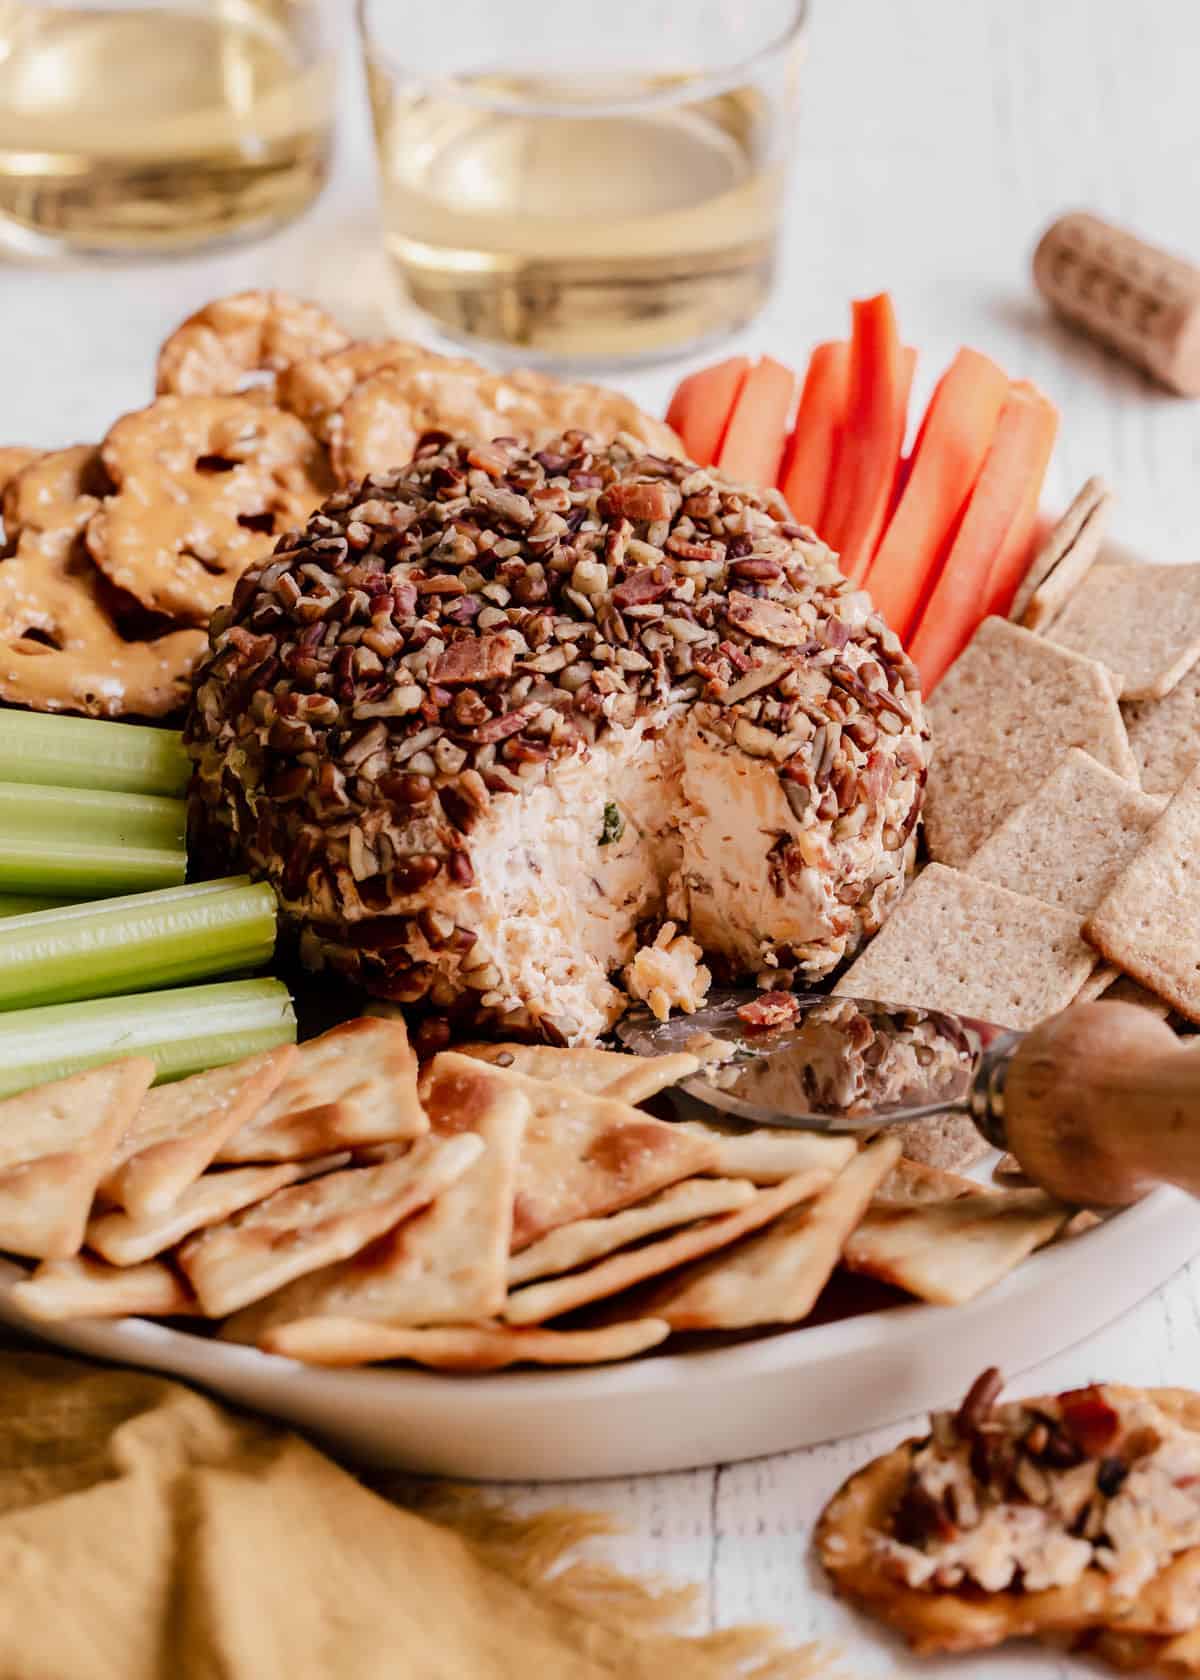 cheese ball covered in chopped pecans and bacon bits, surrounded by crackers, carrot sticks and celery sticks.